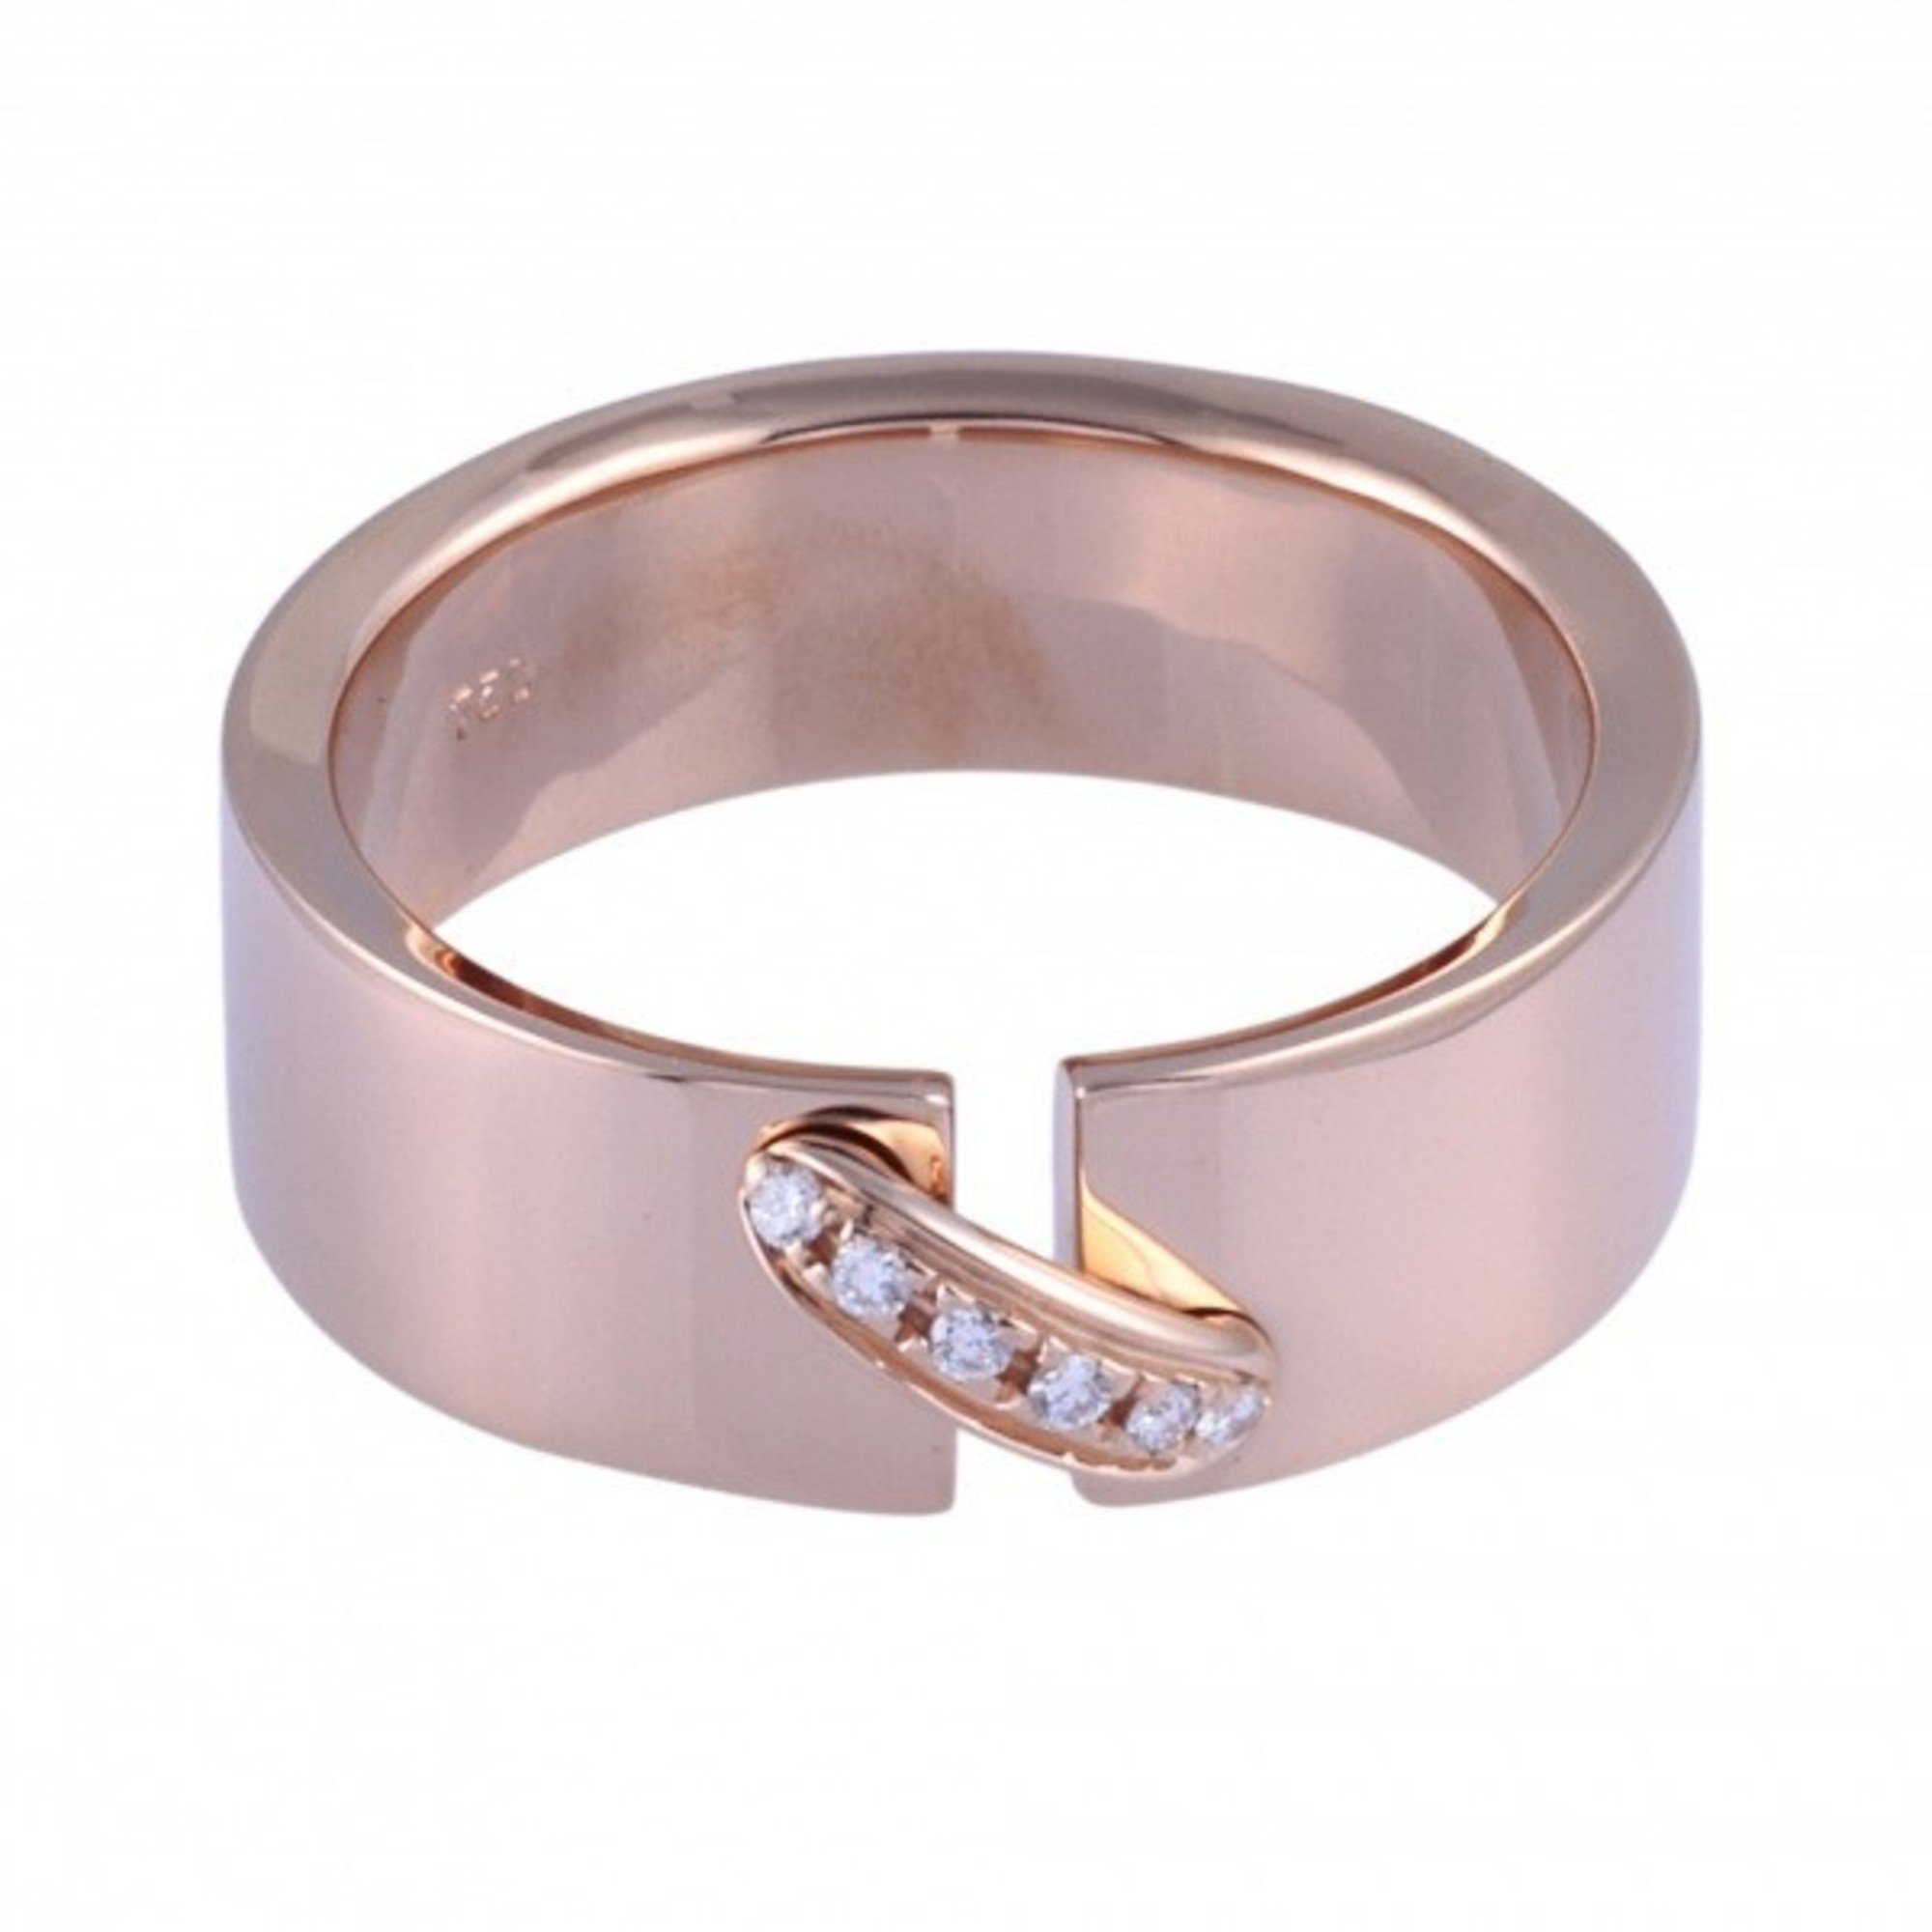 Chaumet Chaumerian Ring K18PG Pink Gold